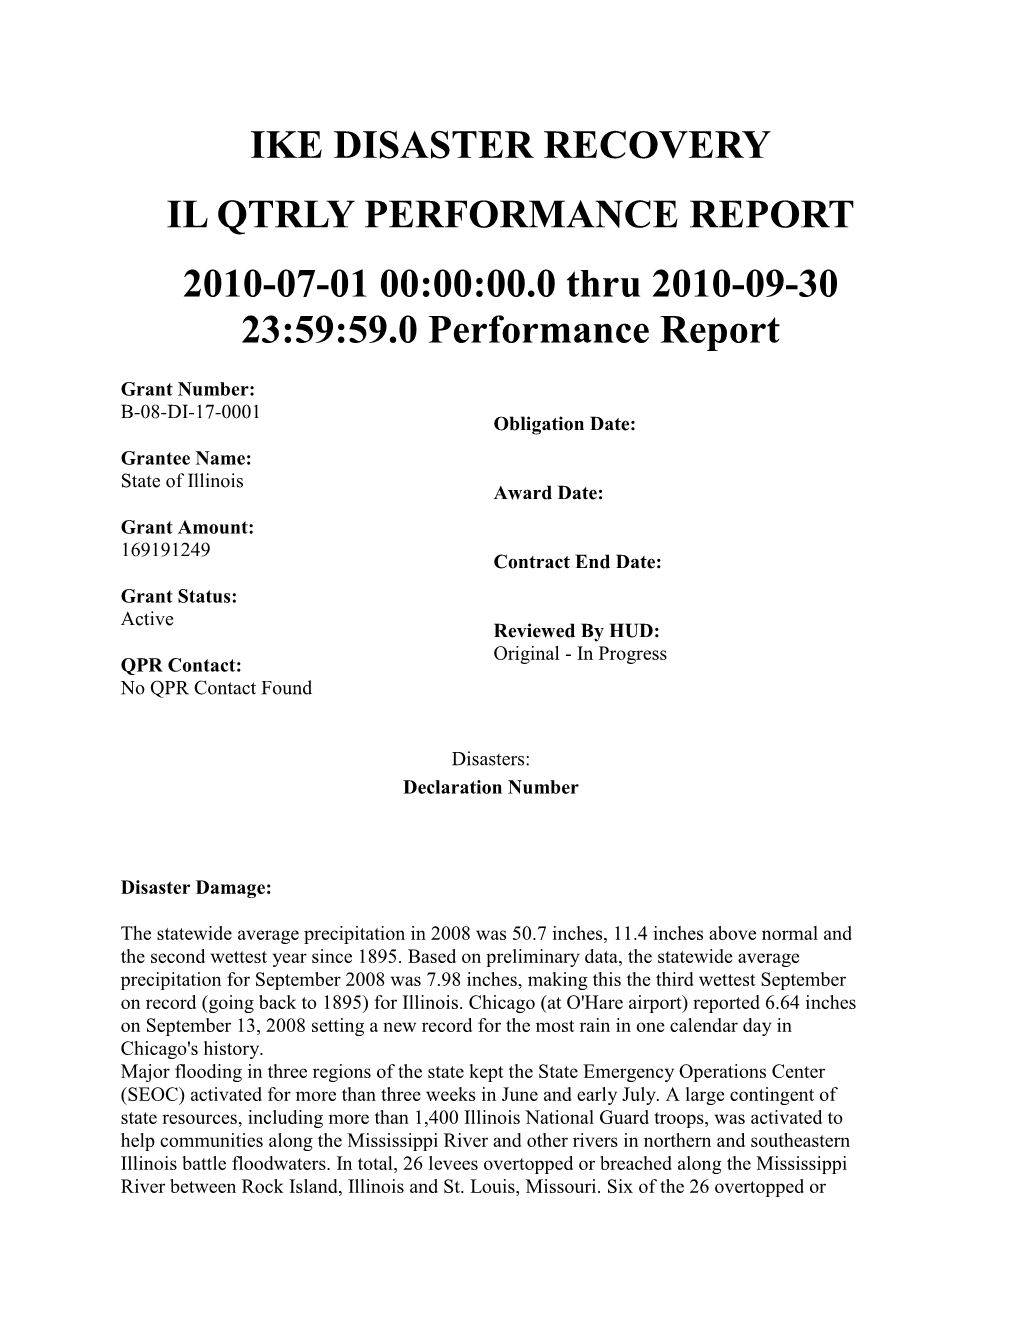 IKE DISASTER RECOVERY IL QTRLY PERFORMANCE REPORT 2010-07-01 00:00:00.0 Thru 2010-09-30 23:59:59.0 Performance Report